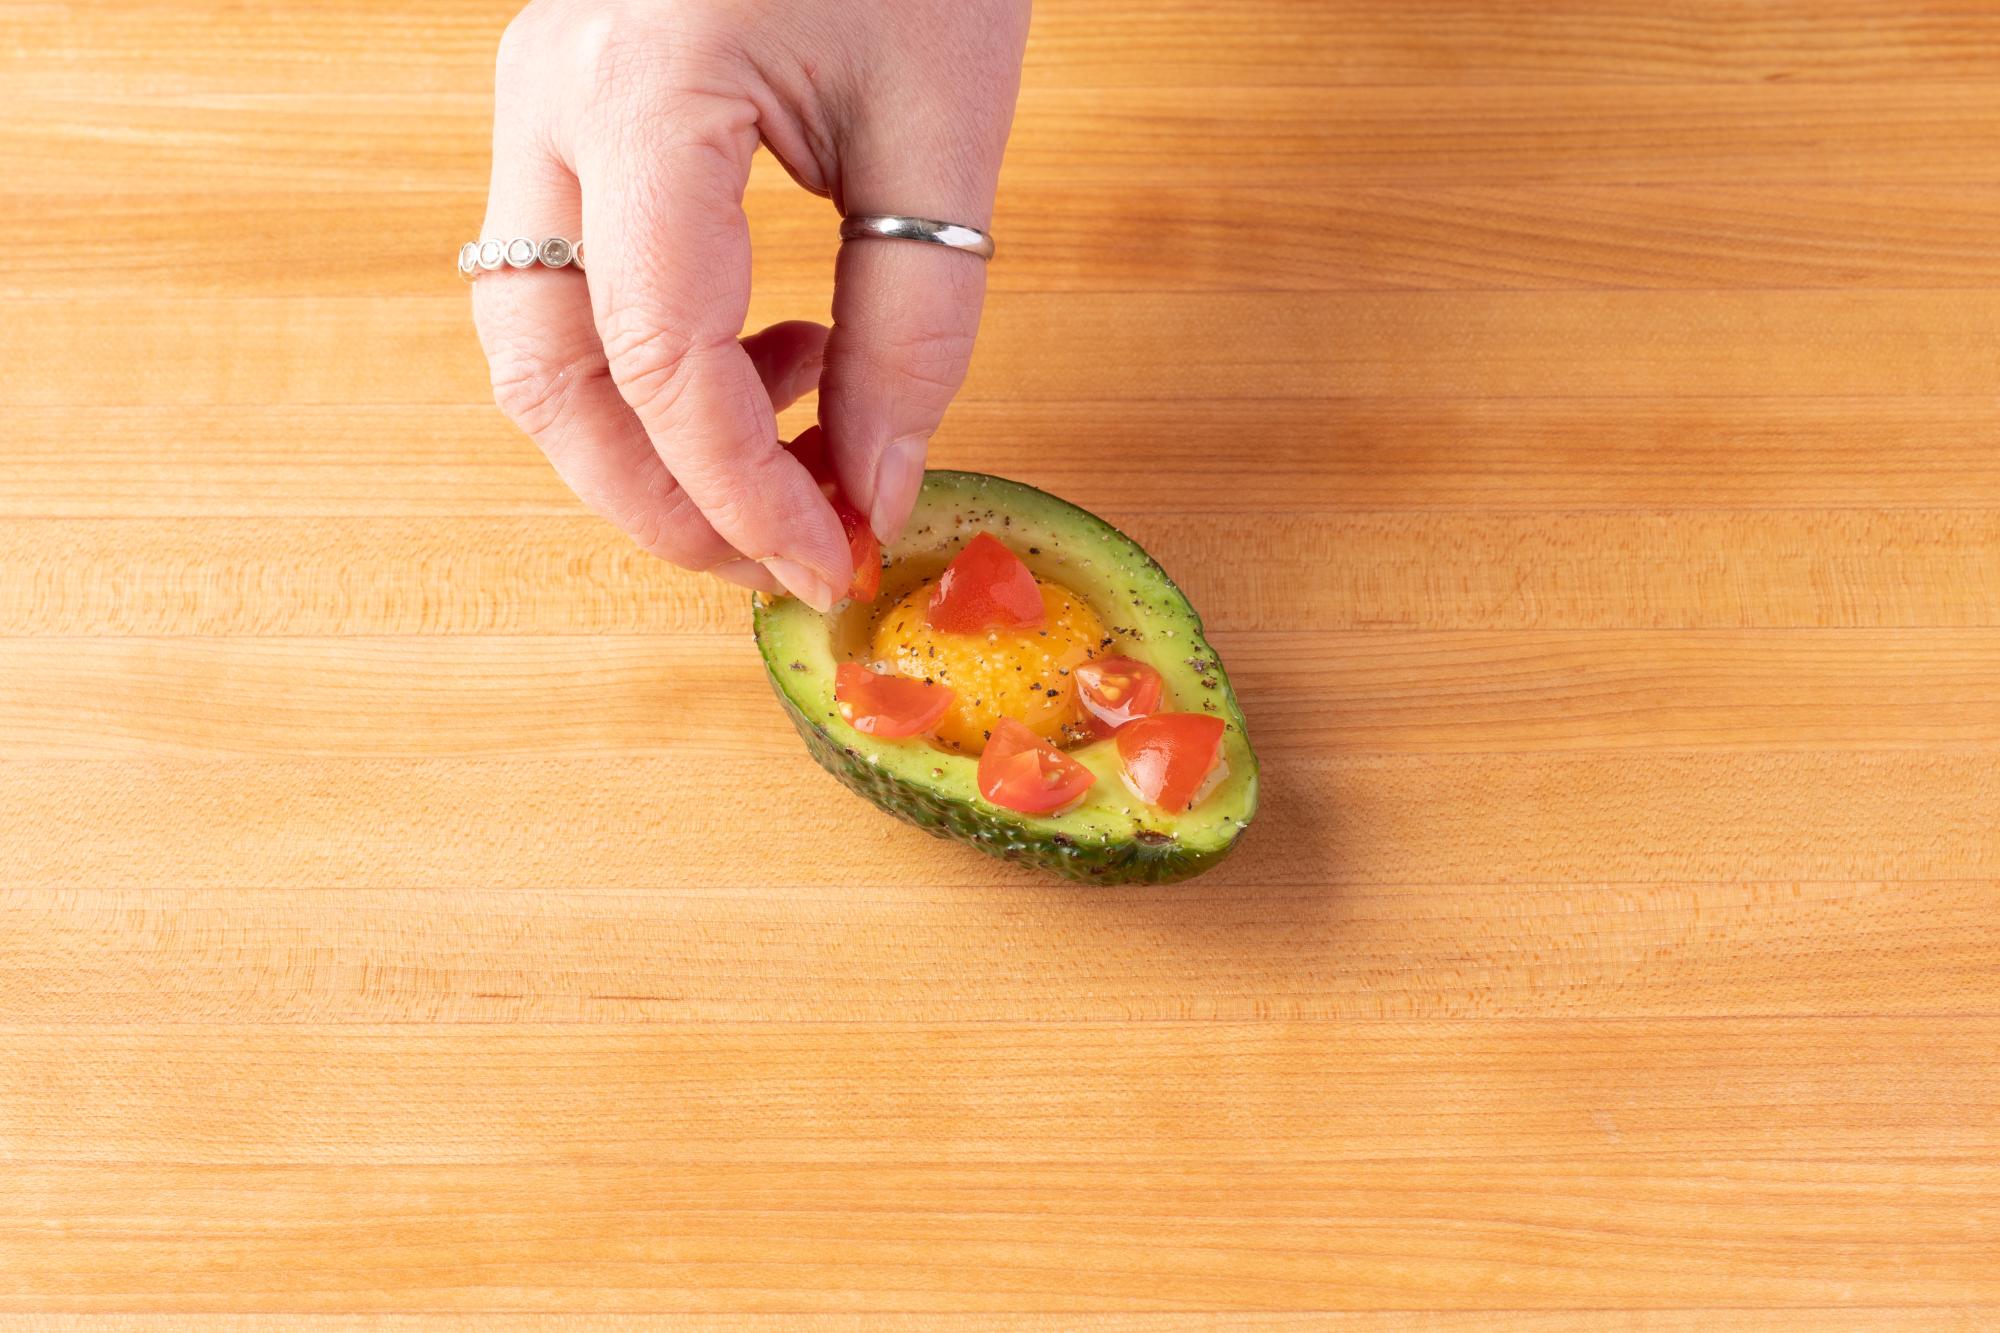 Top the avocado with whatever you'd like.